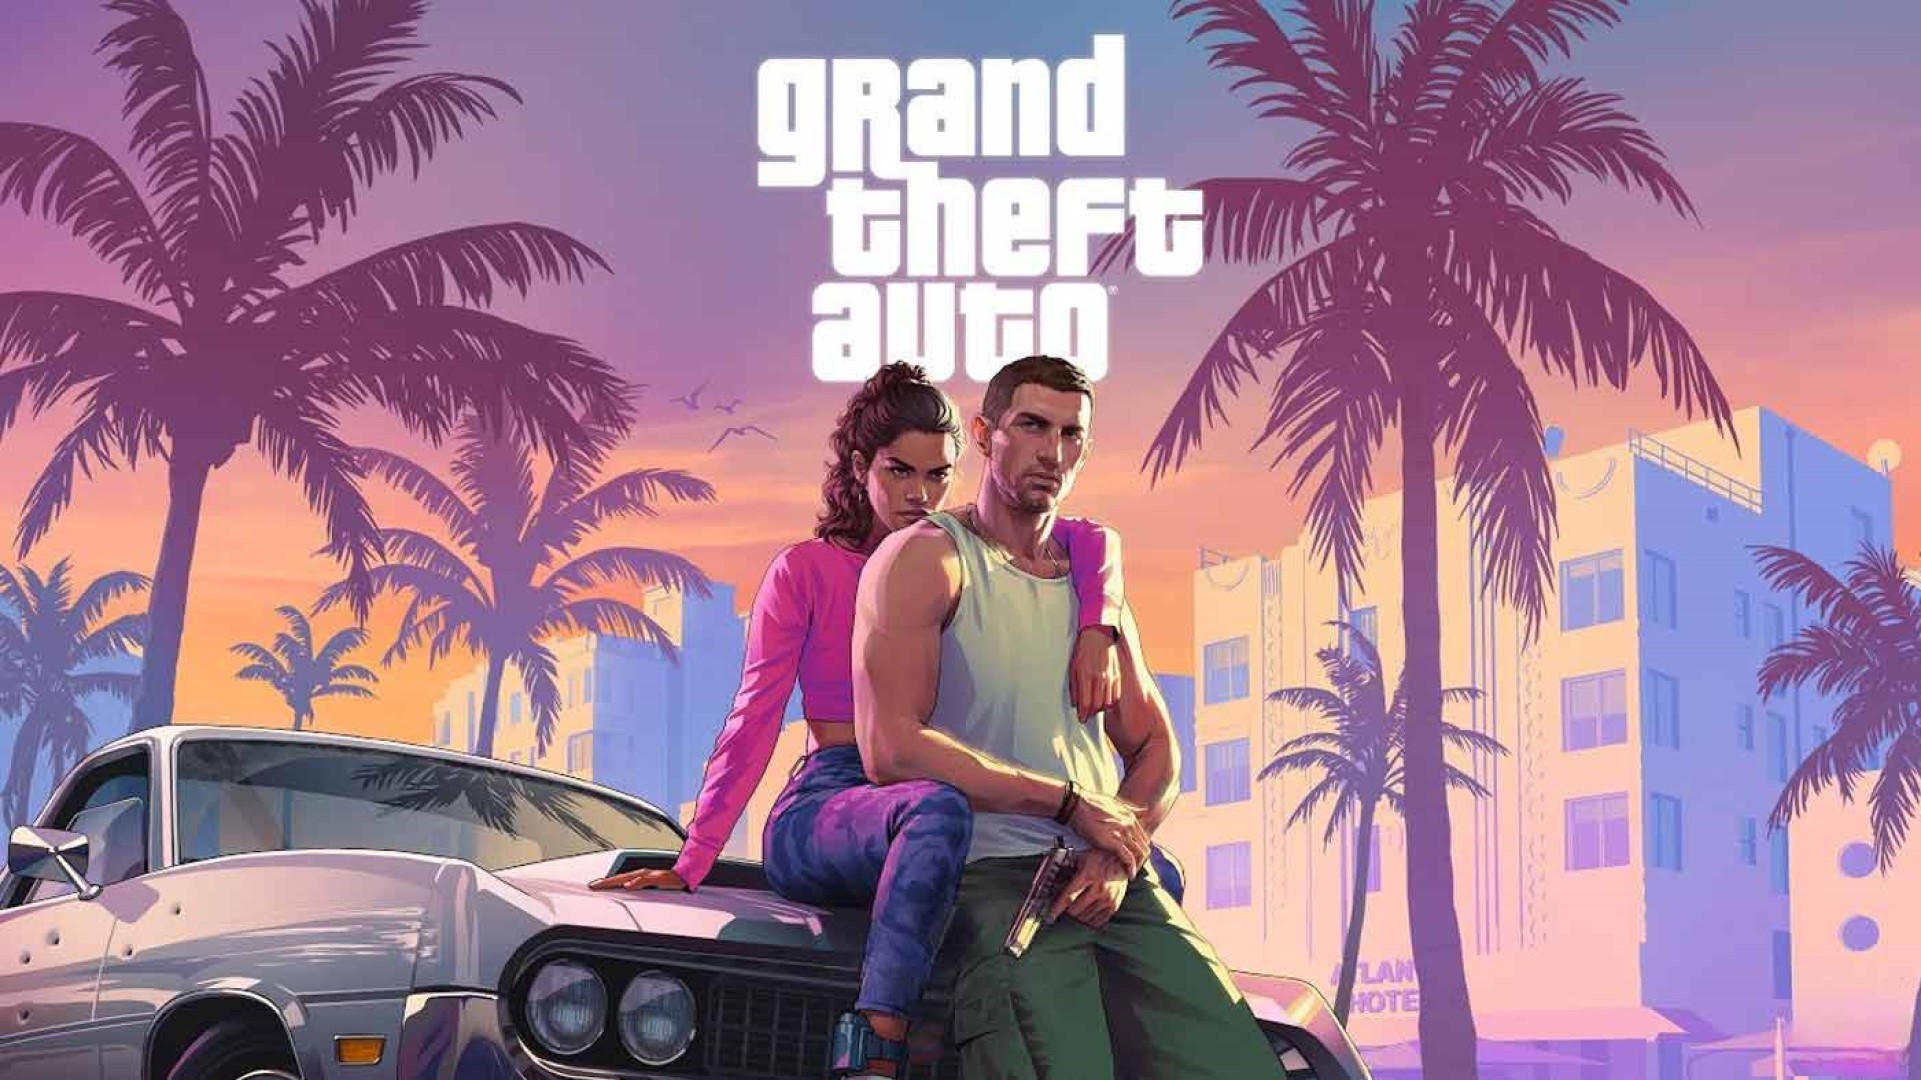 Grand Theft Auto 6 is “Seeking Creative Perfection” and Will Launch When it’s “Optimized Creatively”